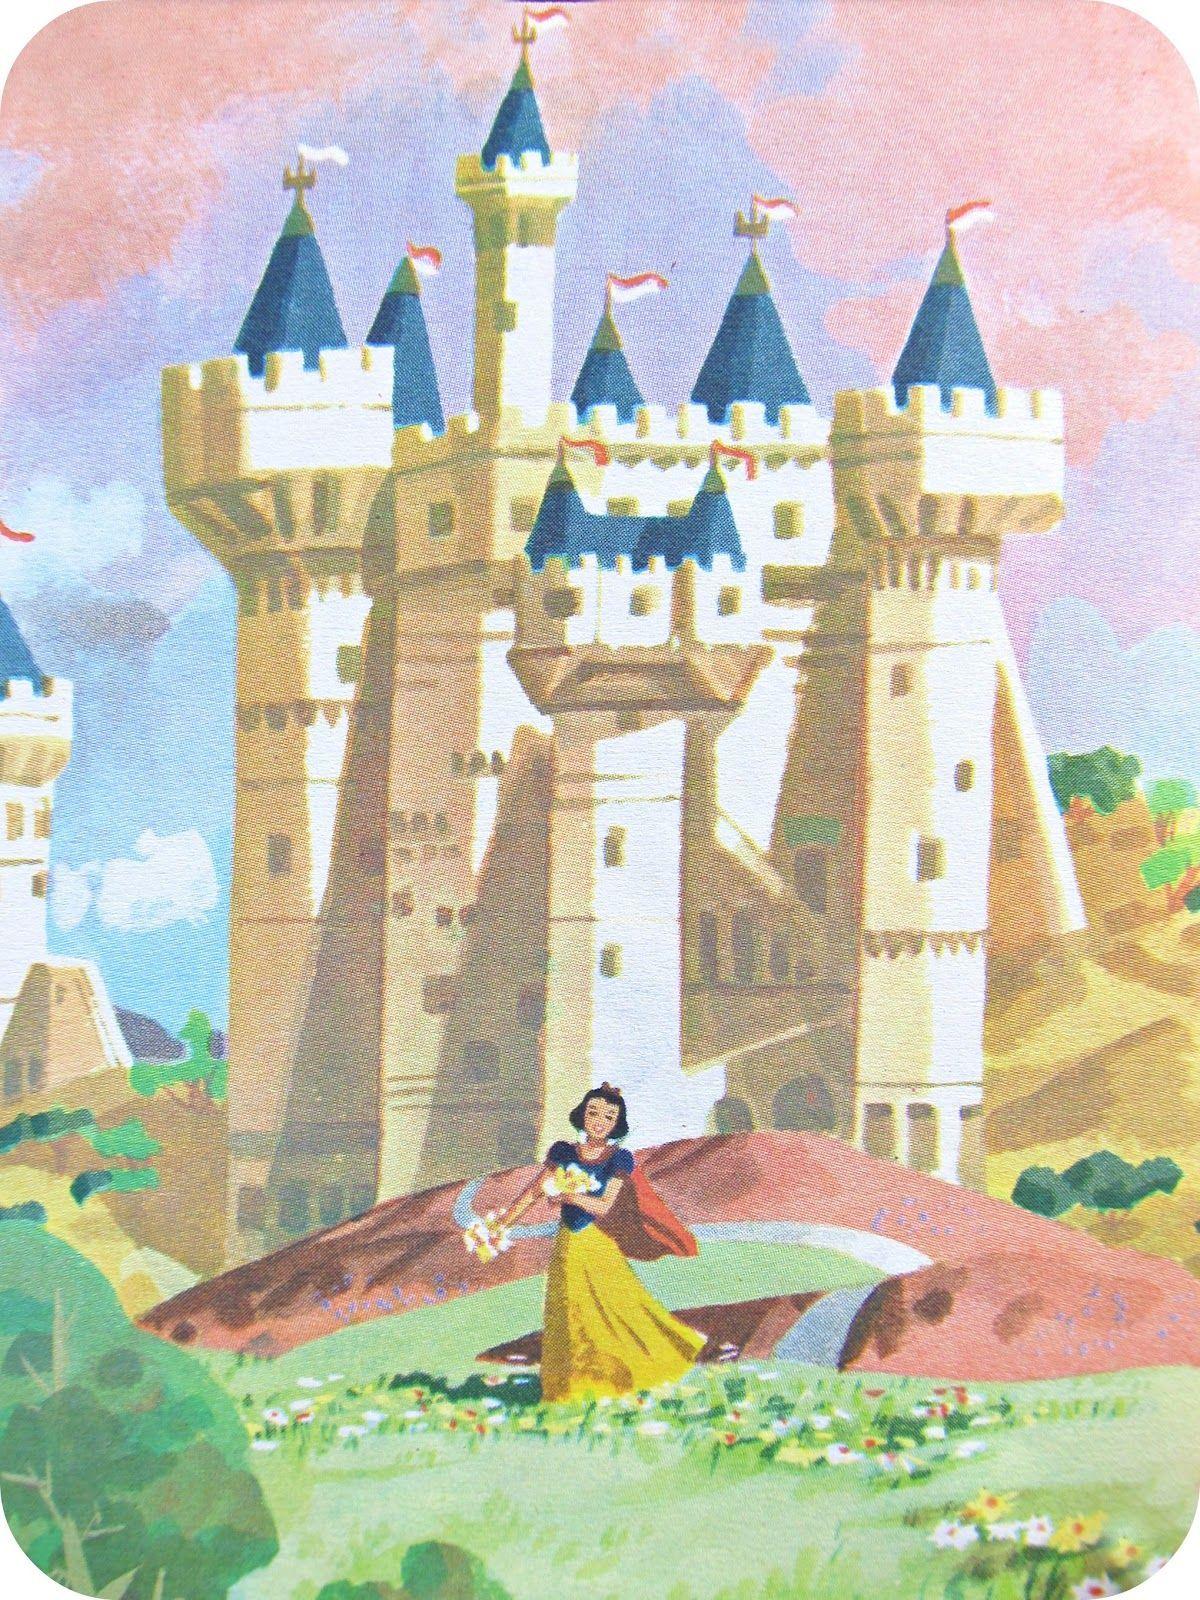 Snow White Castle Wallpapers Top Free Snow White Castle Backgrounds Wallpaperaccess 